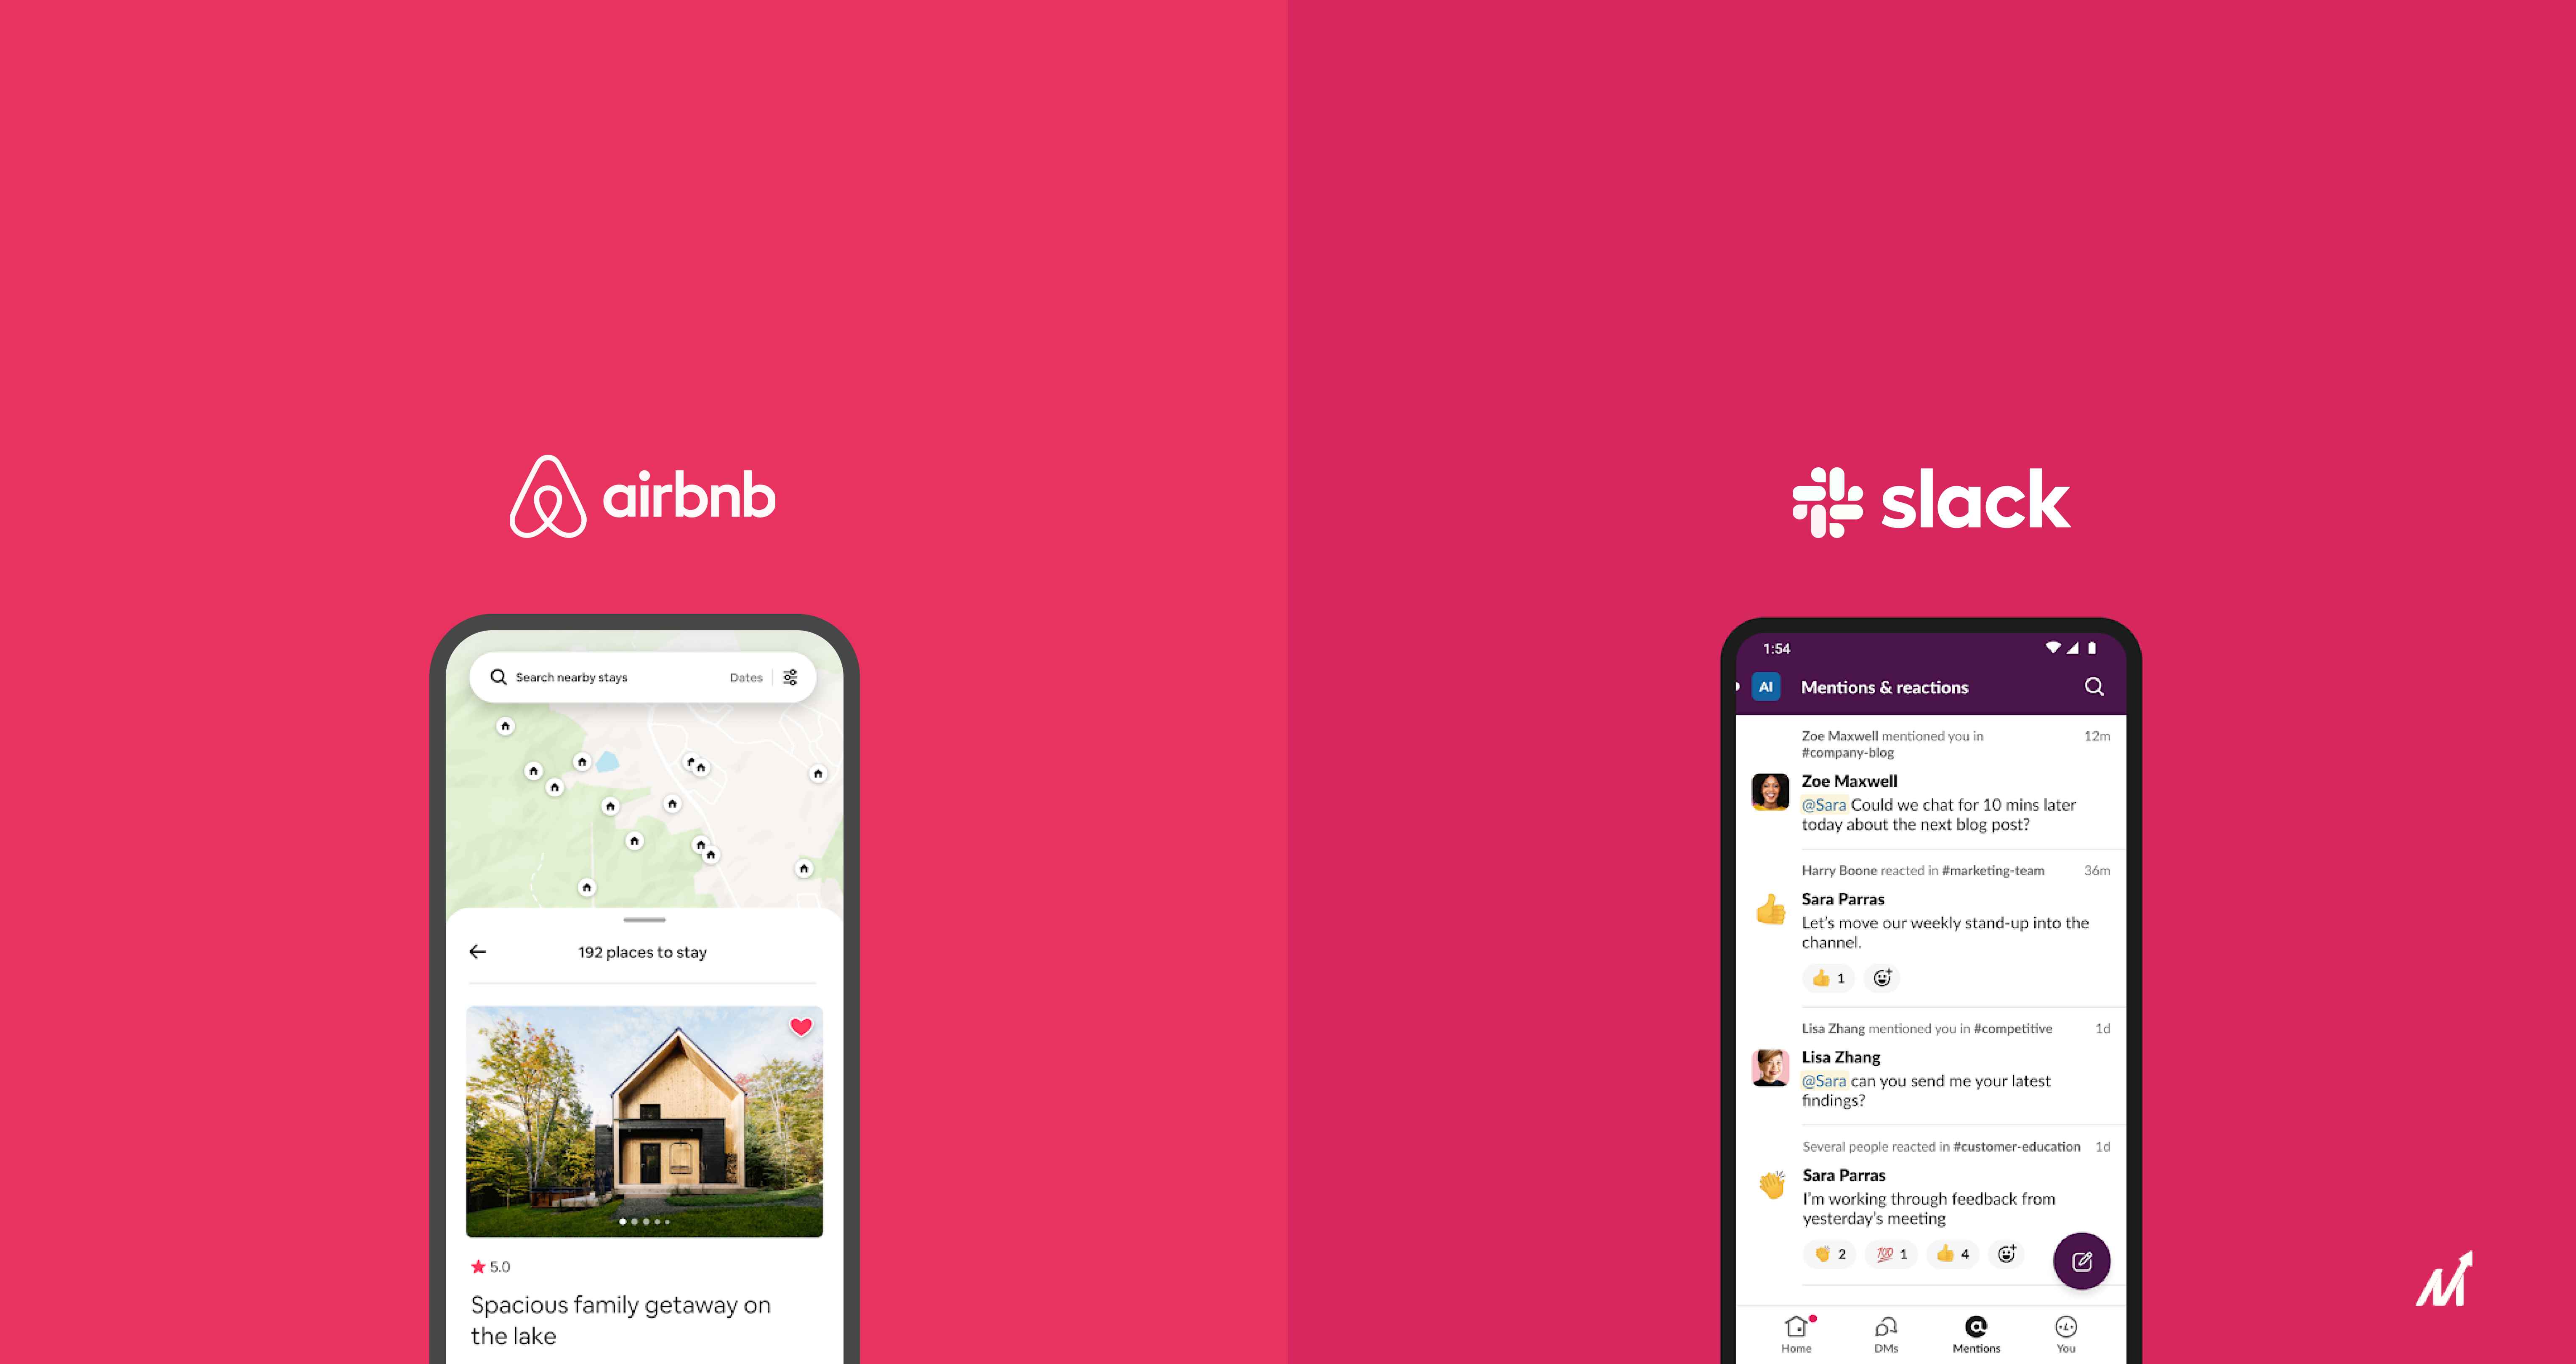 airbnb and slack